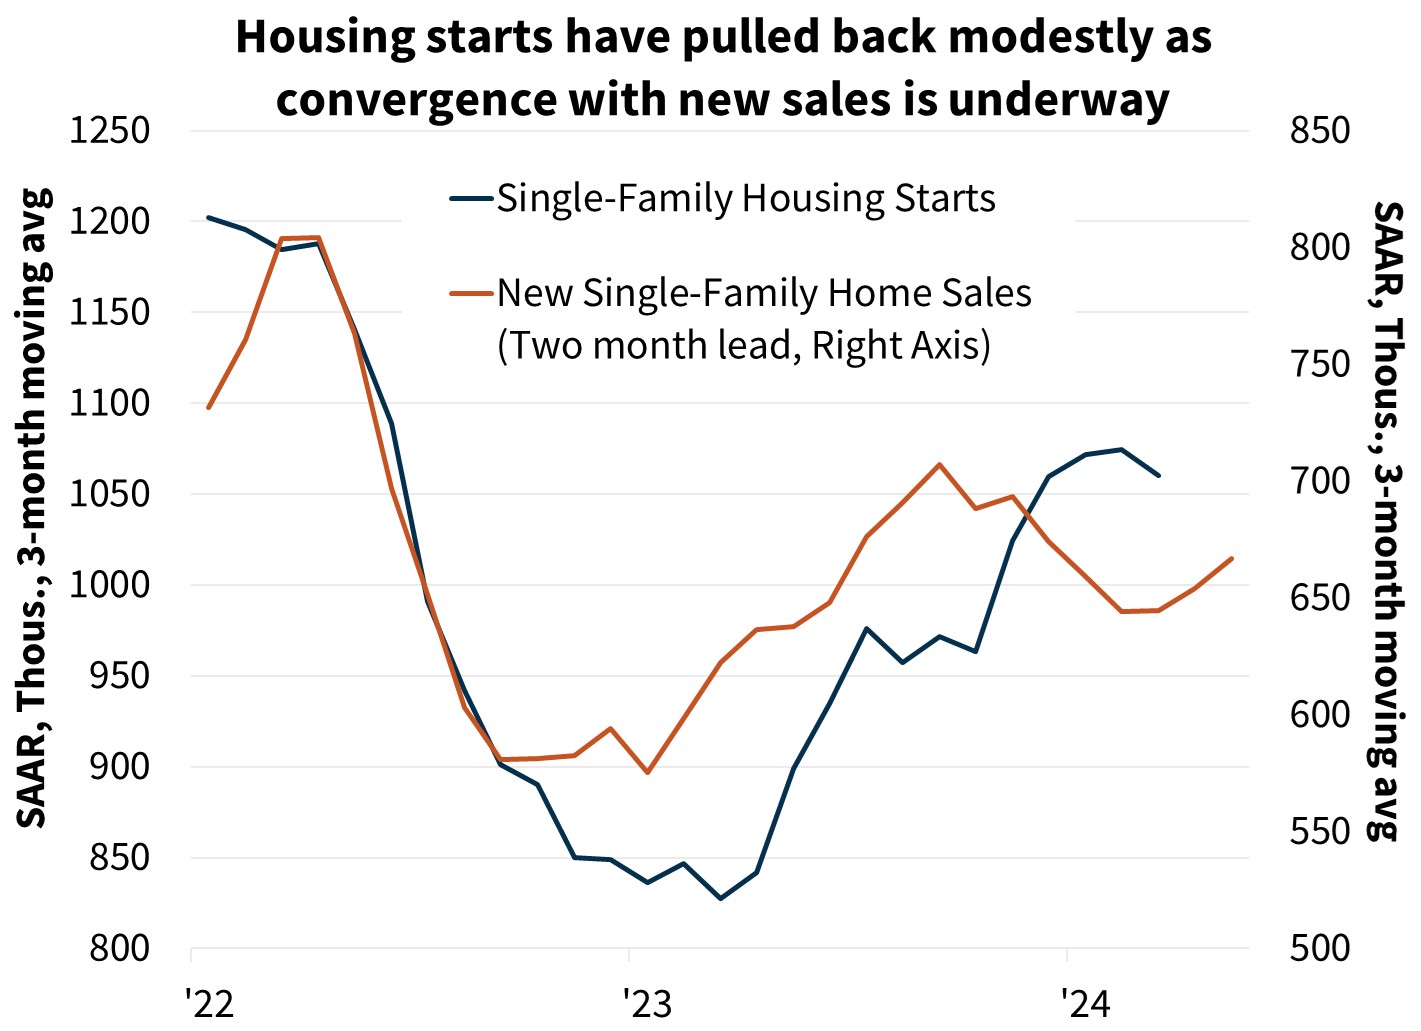 Housing starts have pulled back modestly as convergence with new sales is underway